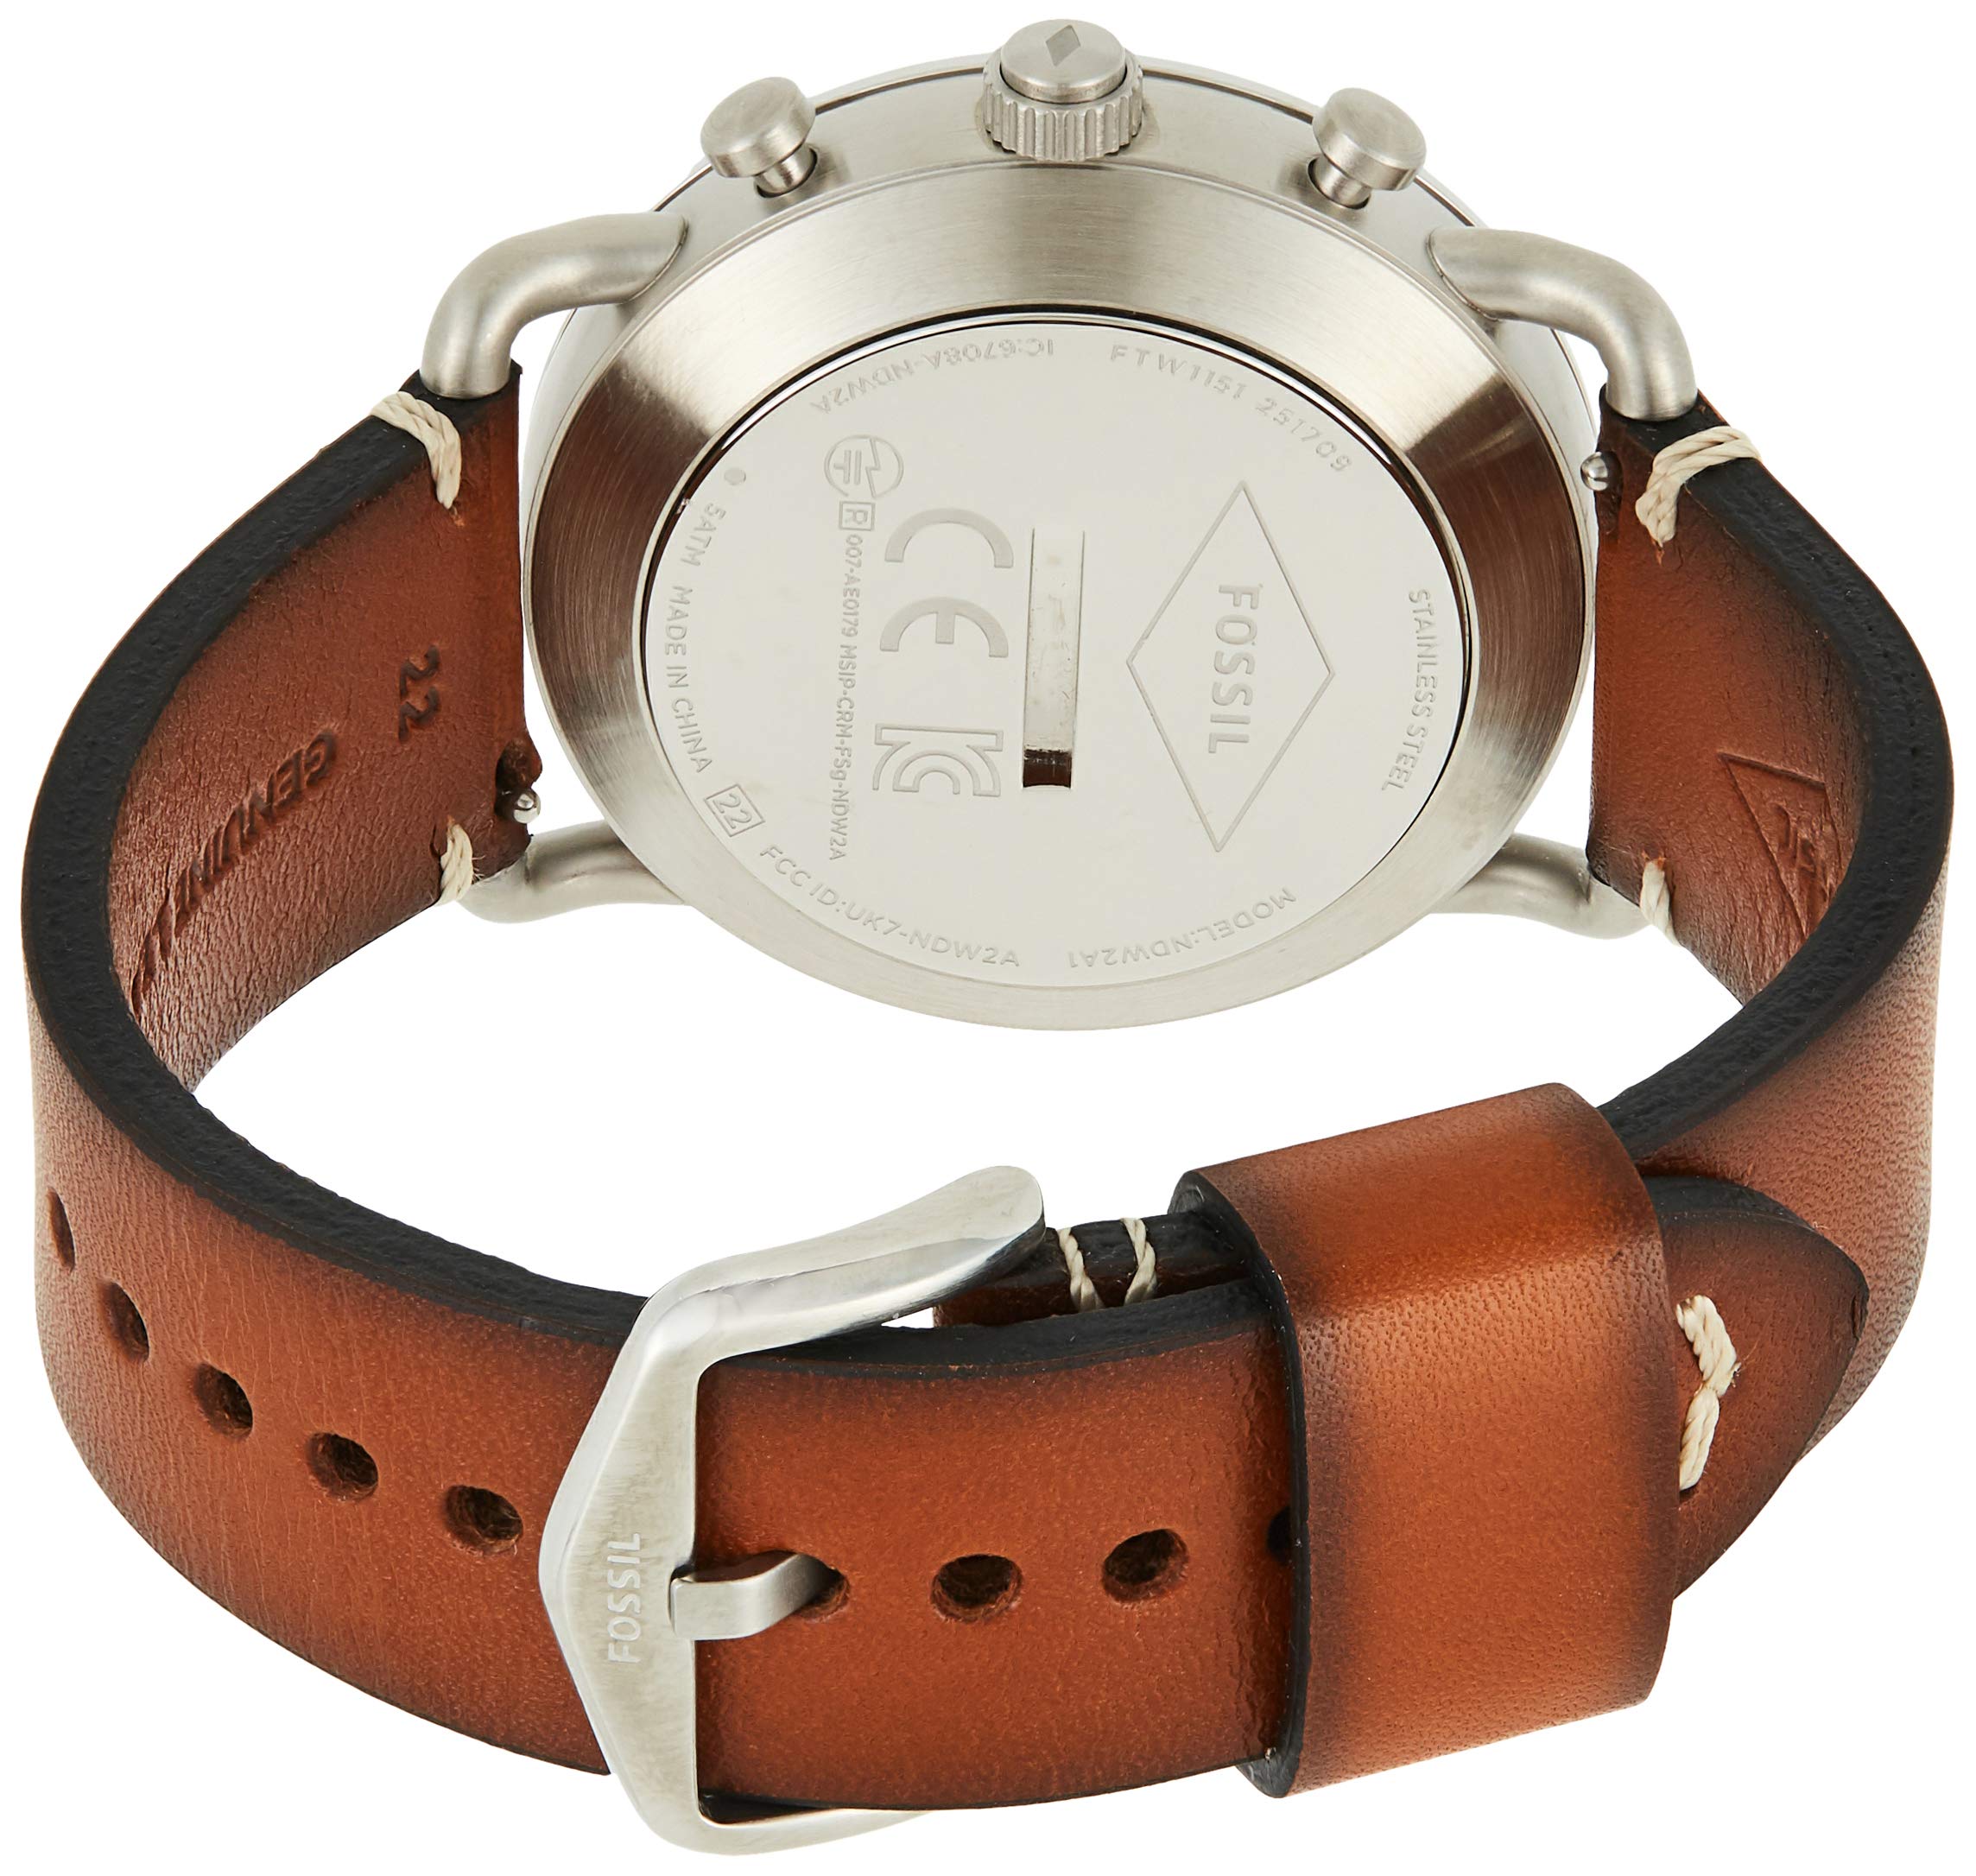 Fossil Men Commuter Stainless Steel and Leather Hybrid Smartwatch, Color: Silver-Tone, Brown (Model: FTW1151)